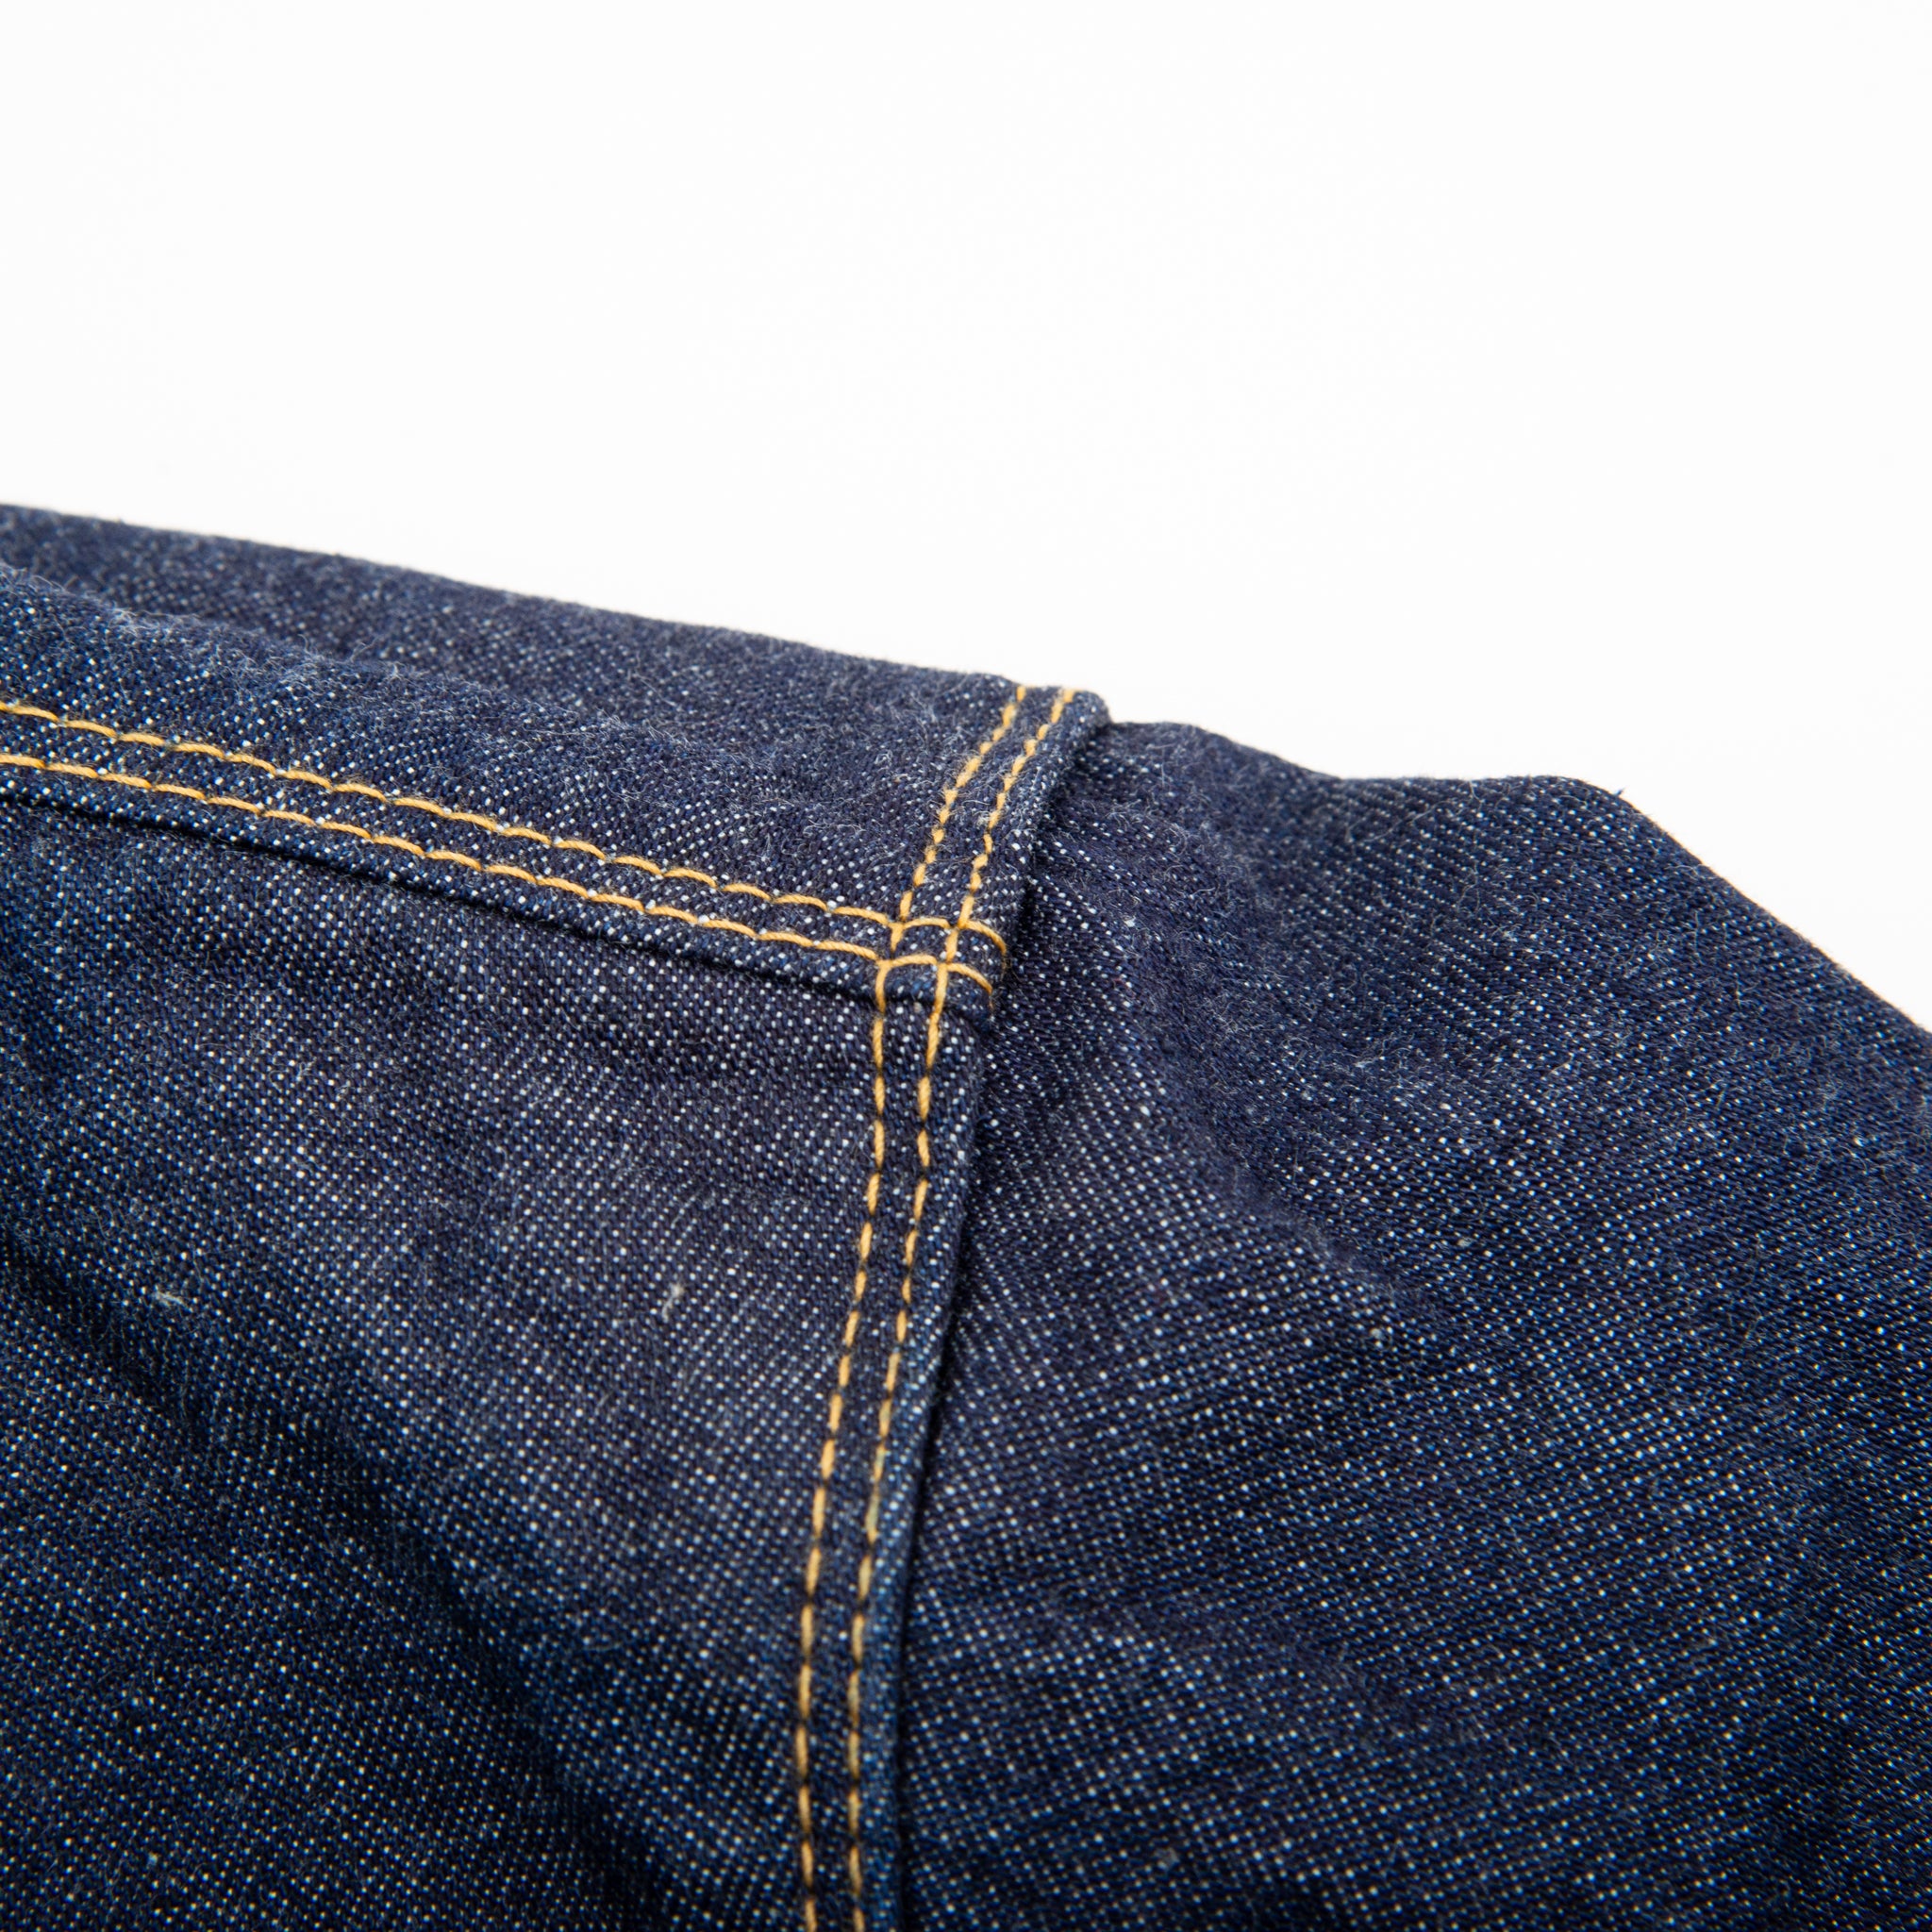 Assorted Selvedge Denim Fabric / Raven (Italy Candiani) Shop Assorted  Selvedge Denim Fabric Raven (Italy Candiani) by the Yard : Online Fabric  Store by the yard, Discount Wholesale Fabric: 40% off!